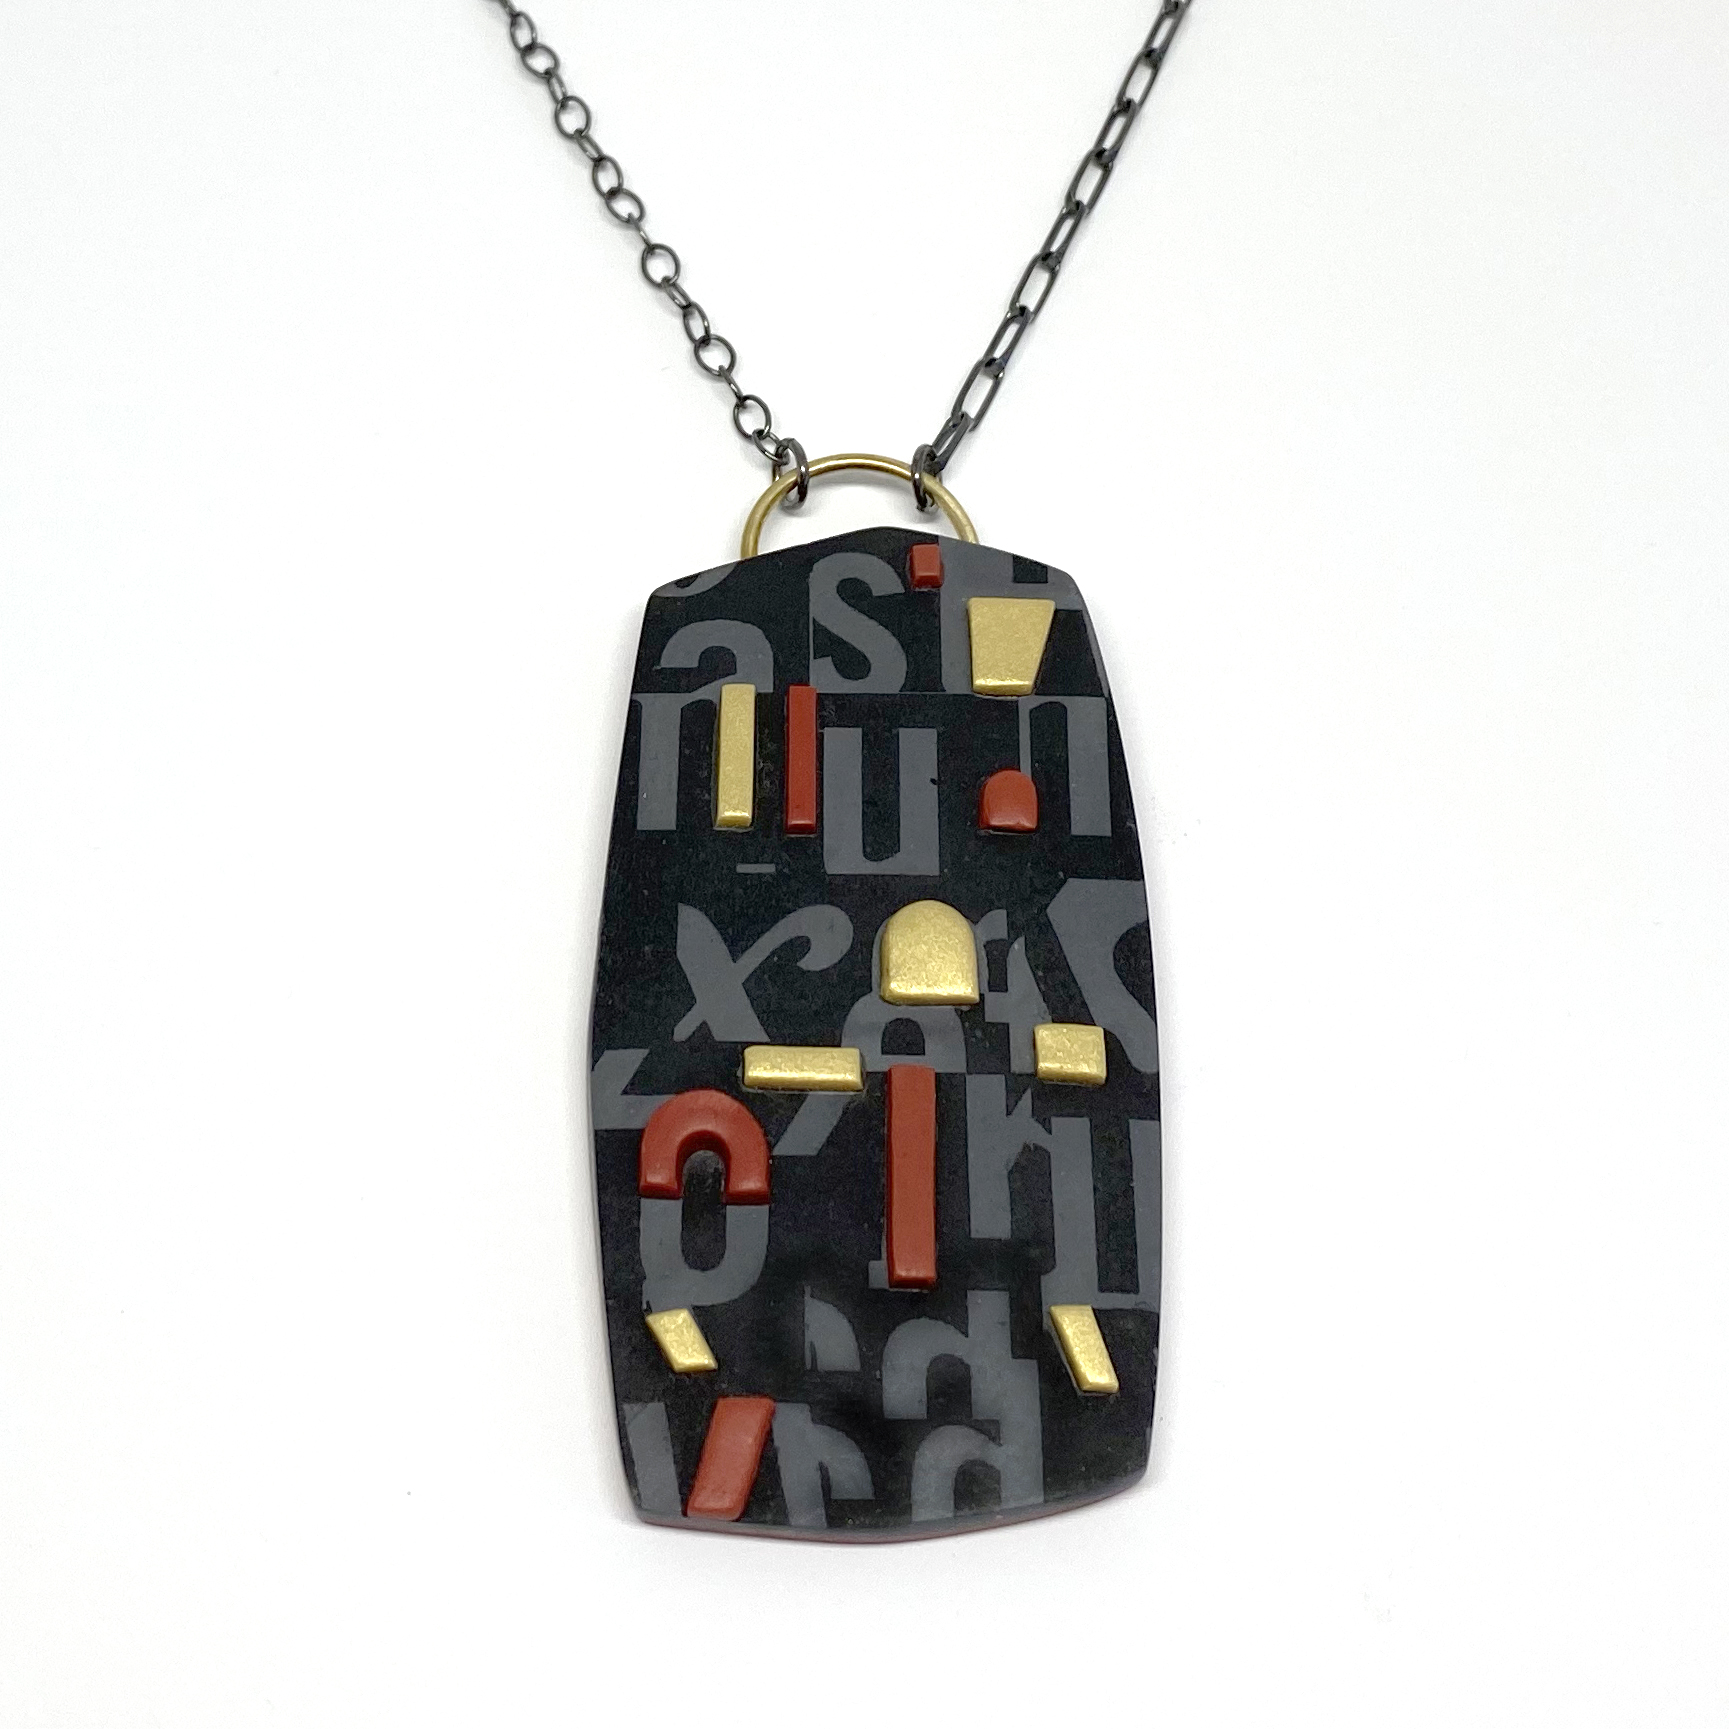 Jand Pellicciotto polymer clay pendant with brass and sterling silver.